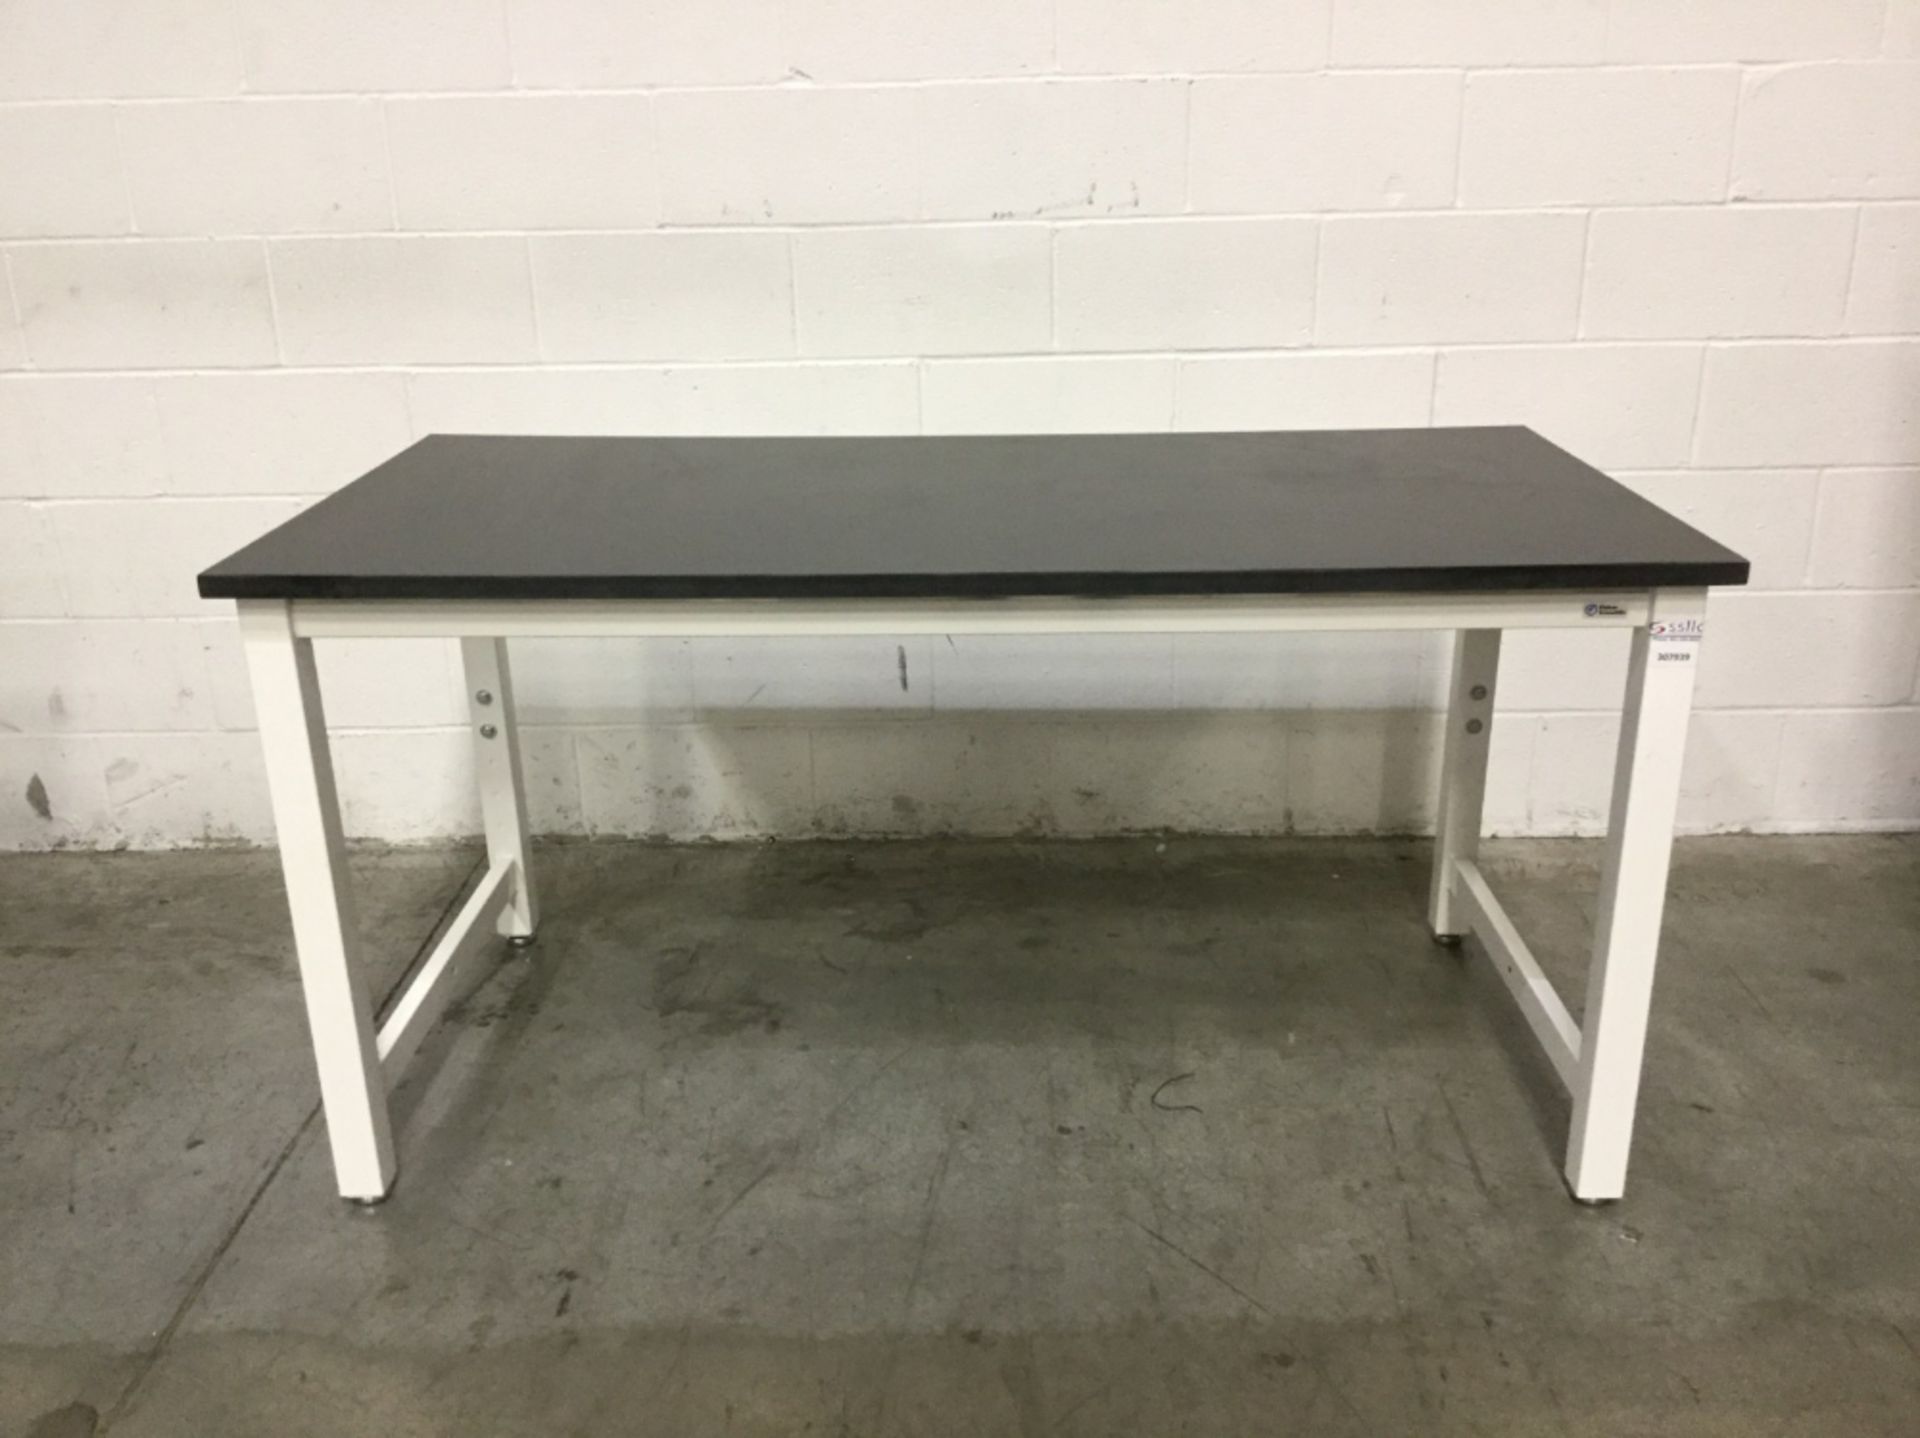 5' Fisher Scientific Stationary Laboratory Table